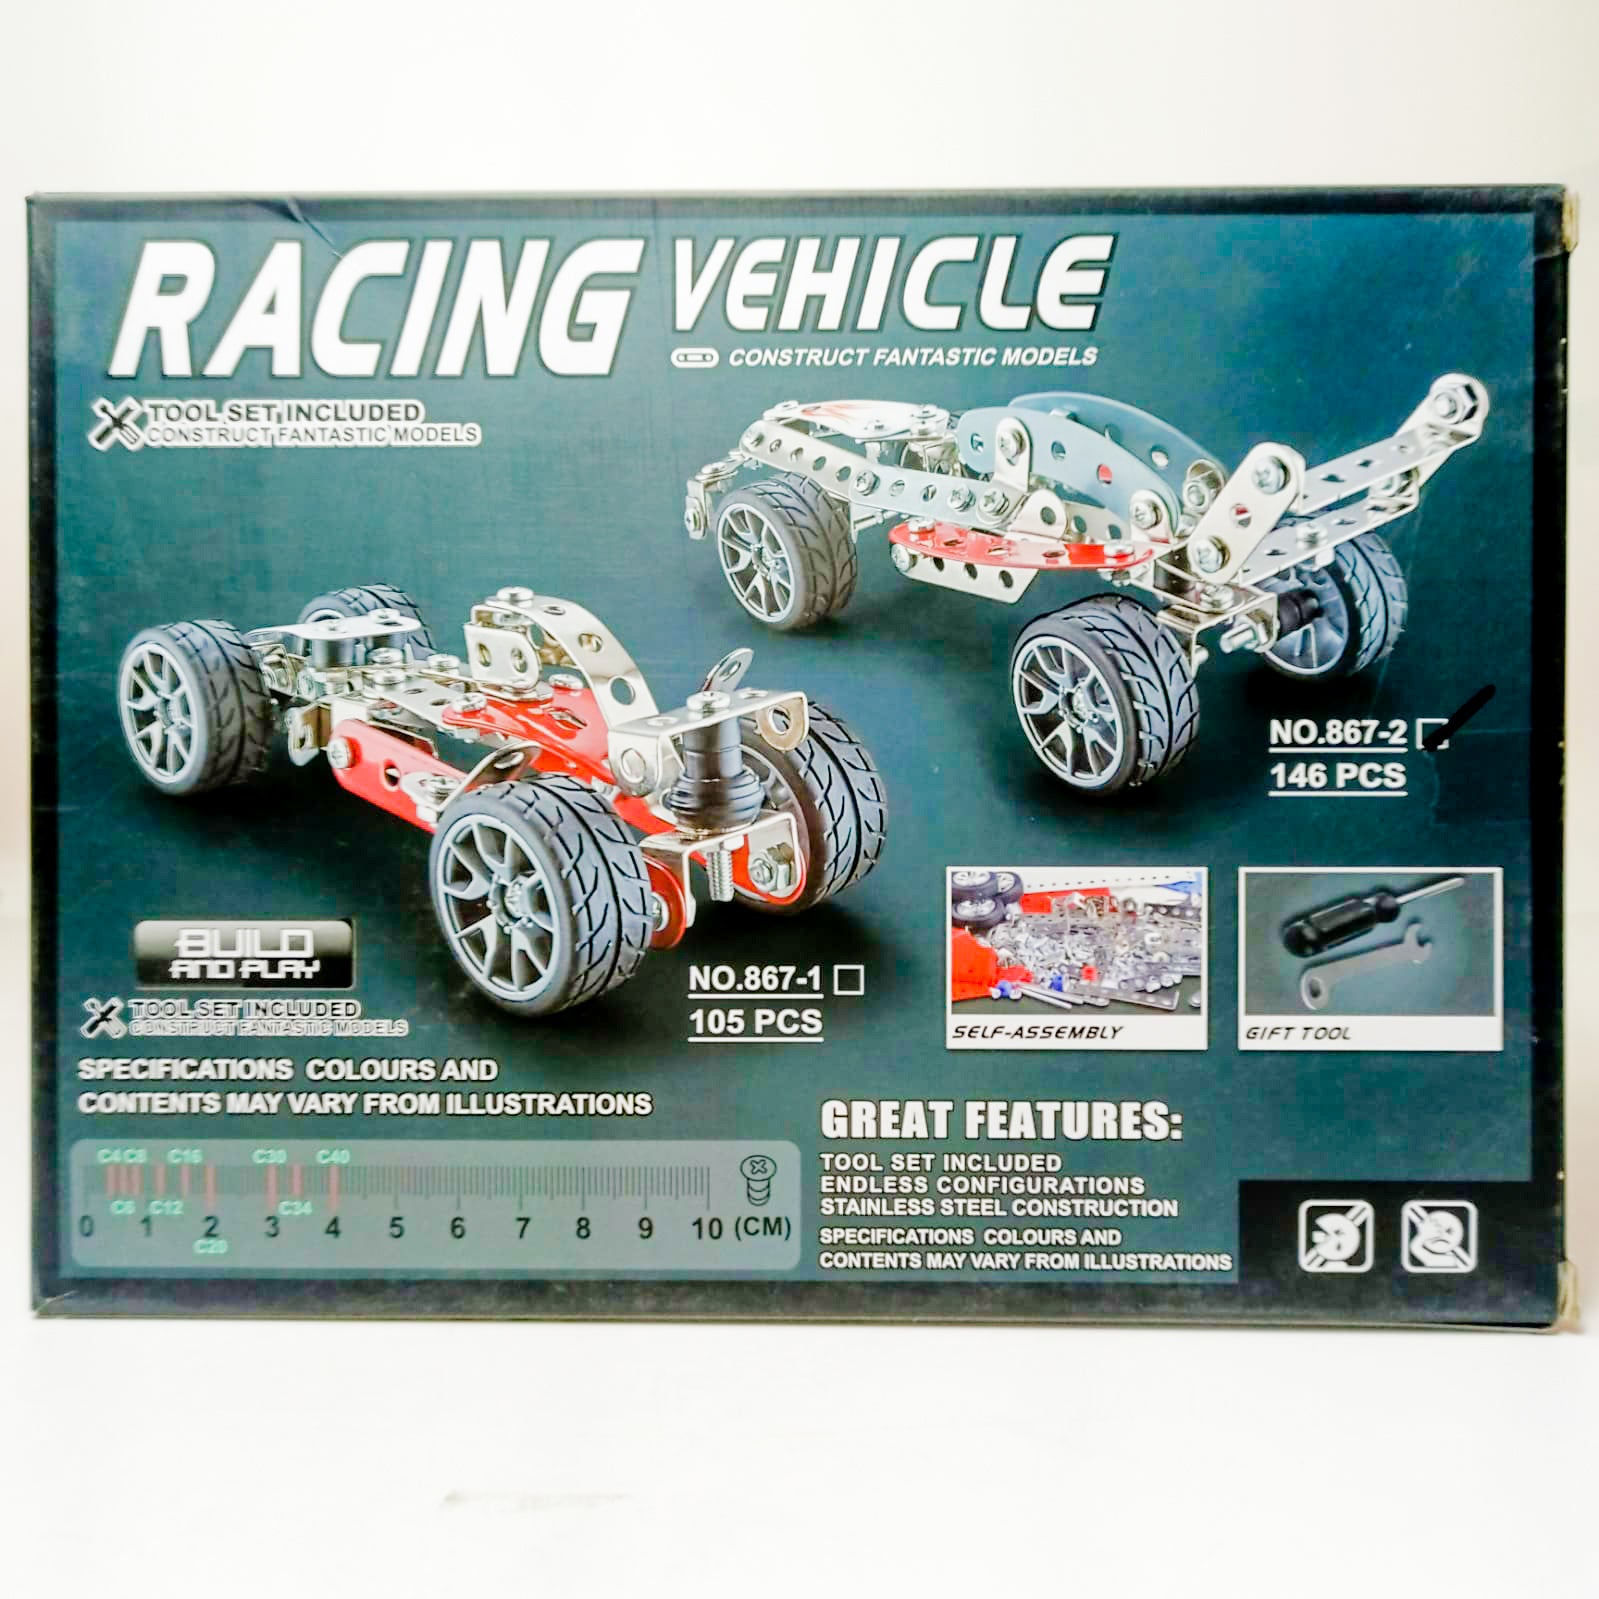 Racing Vehicle Construction Toy Building Blocks For Kids